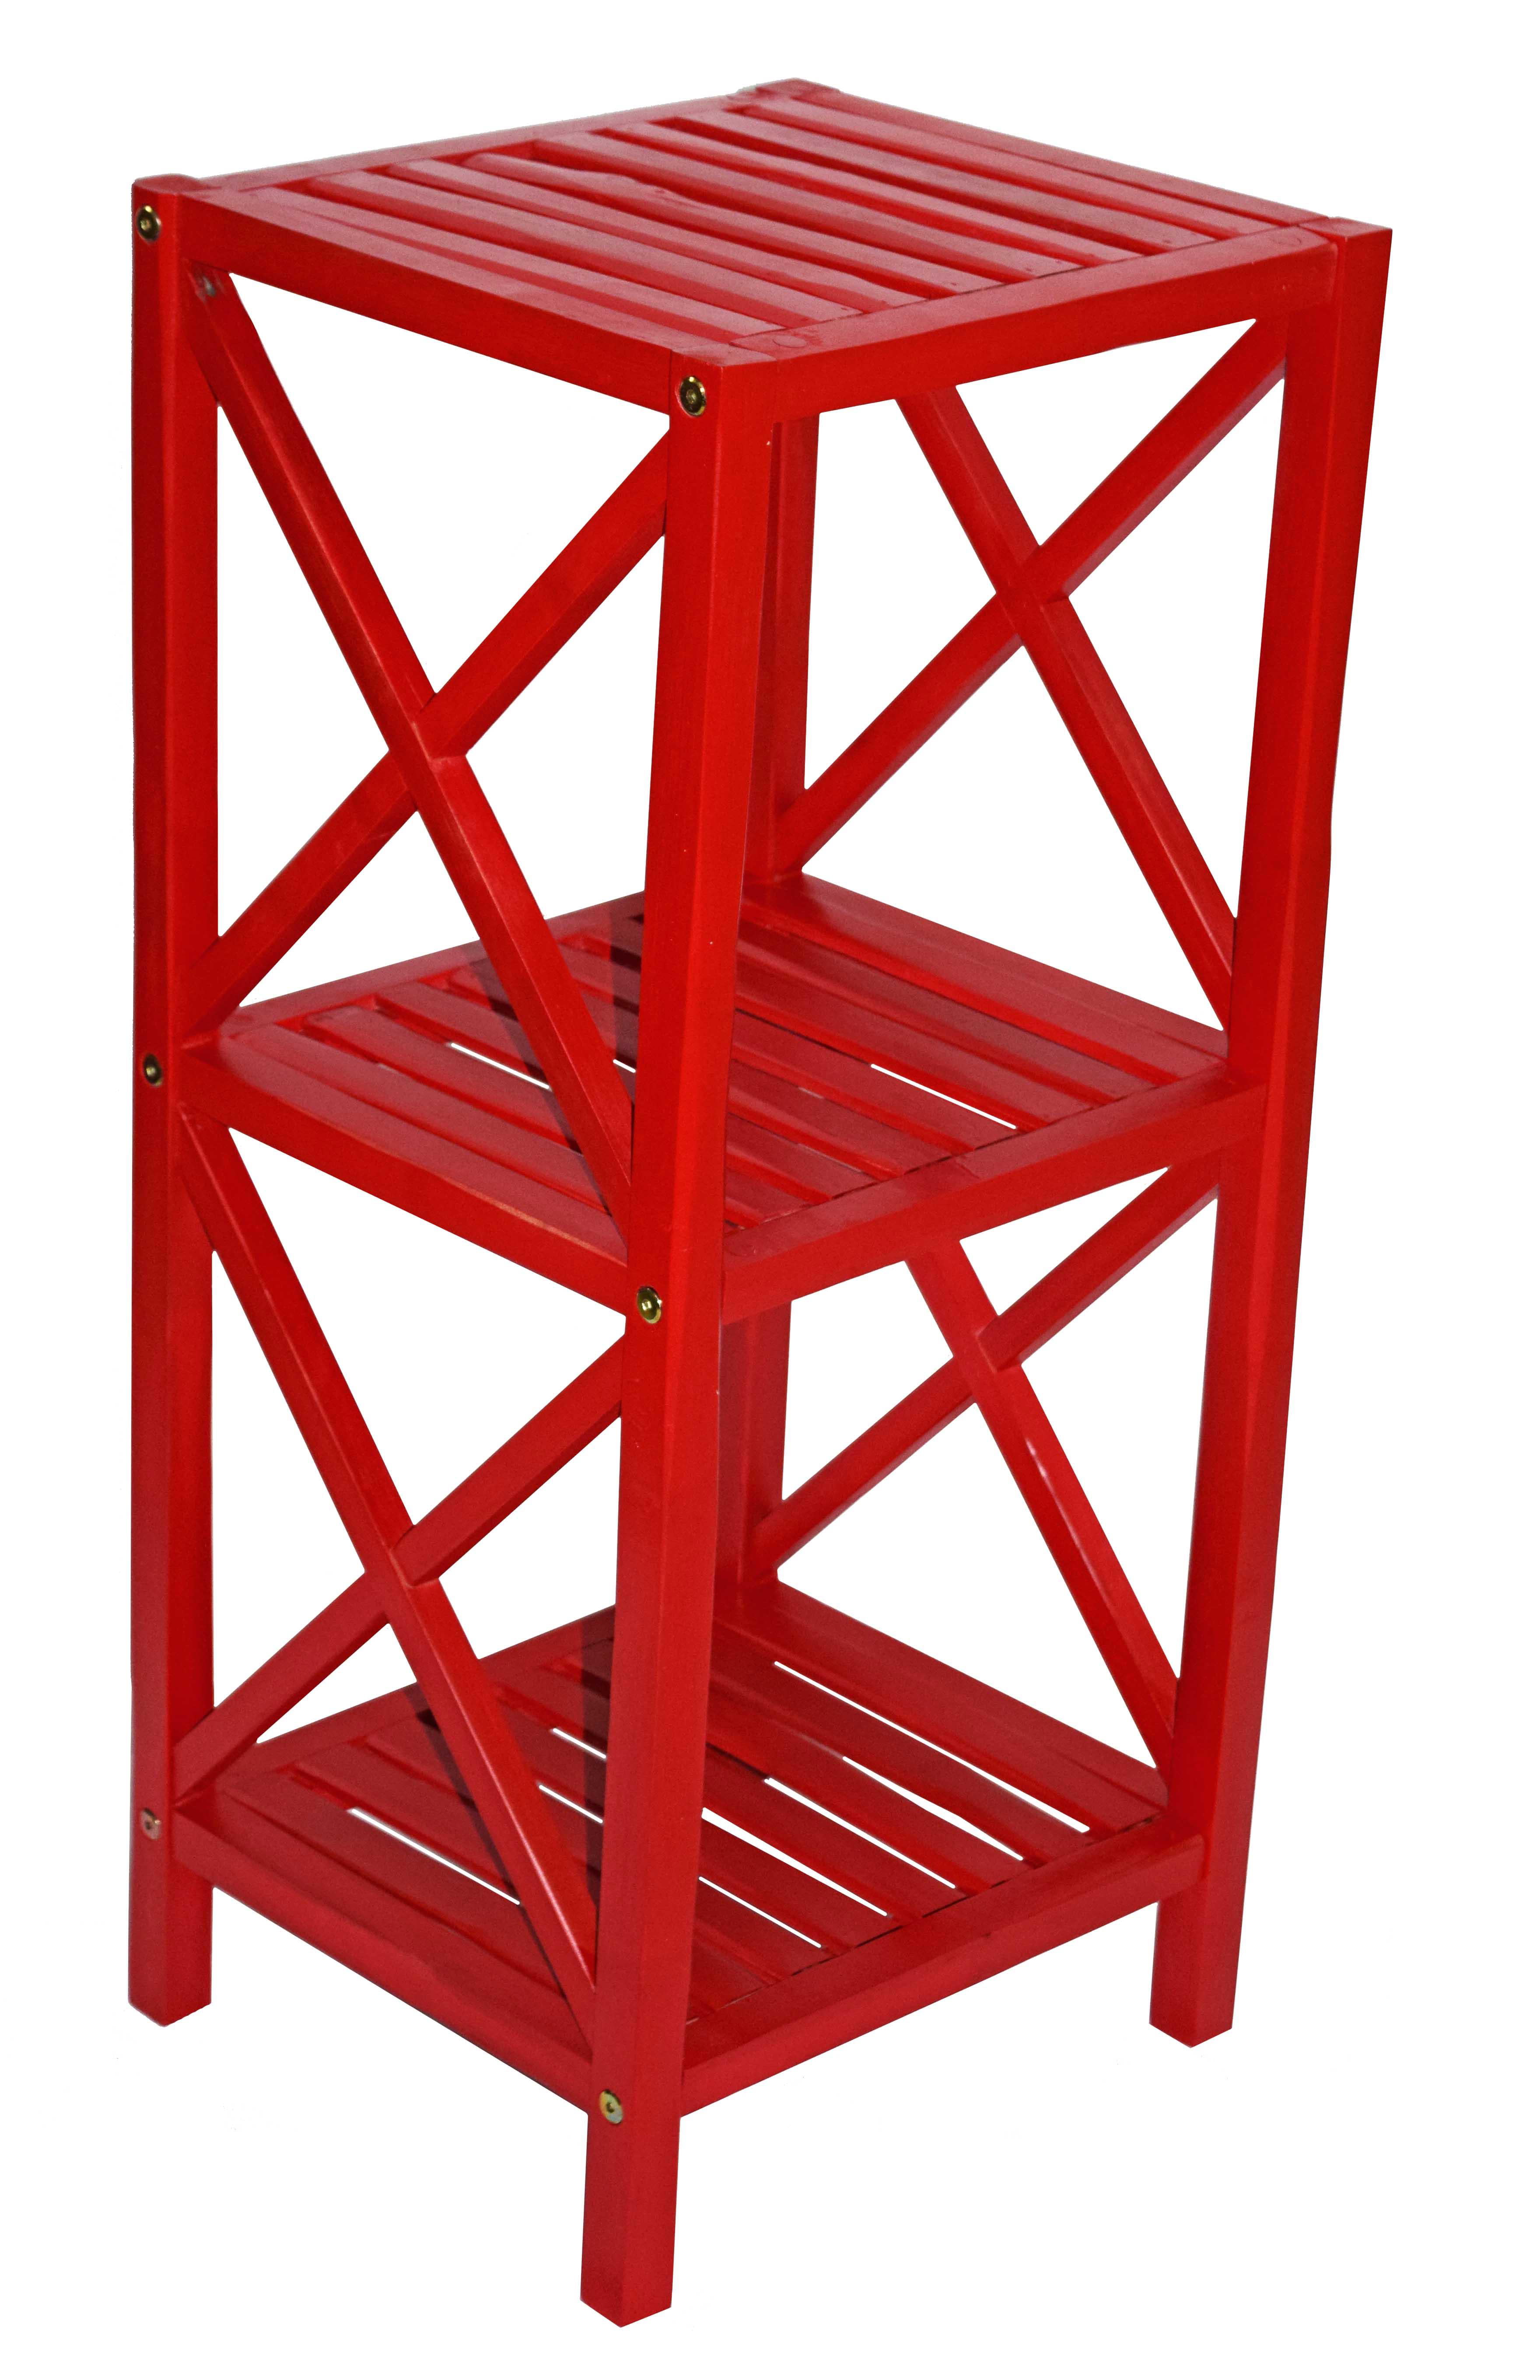 Bamboo Rack-Color:Red,Shape:Square,Size:3 Tier